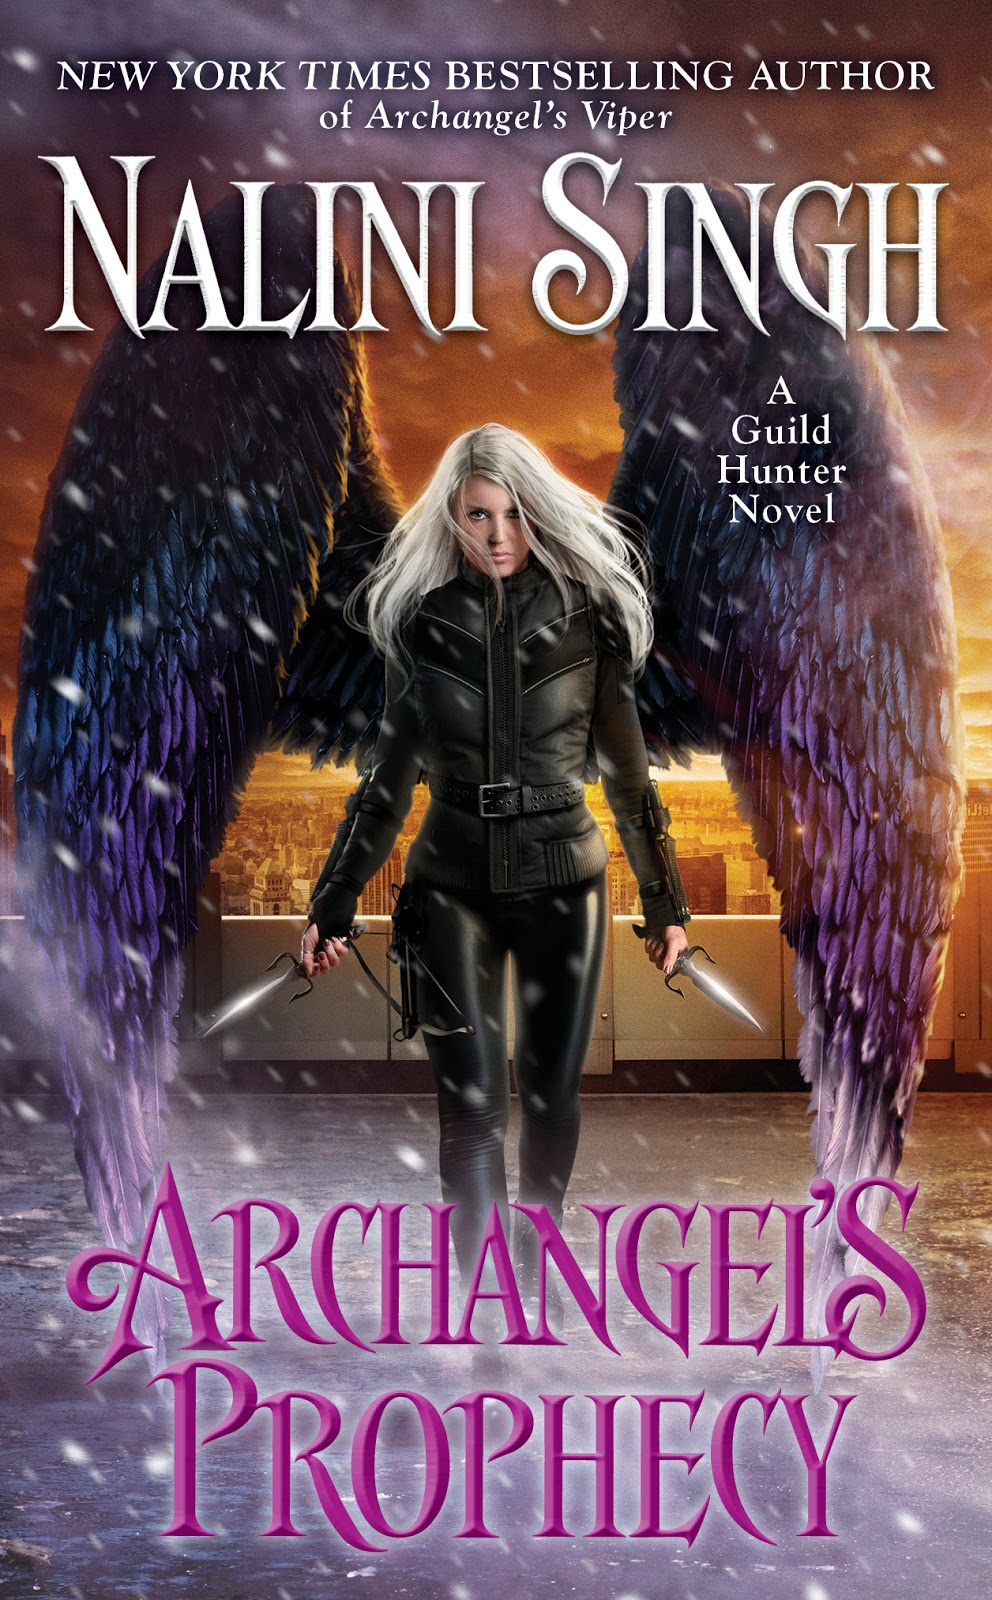 Review + Excerpt: Archangel’s Prophecy by Nalini Singh